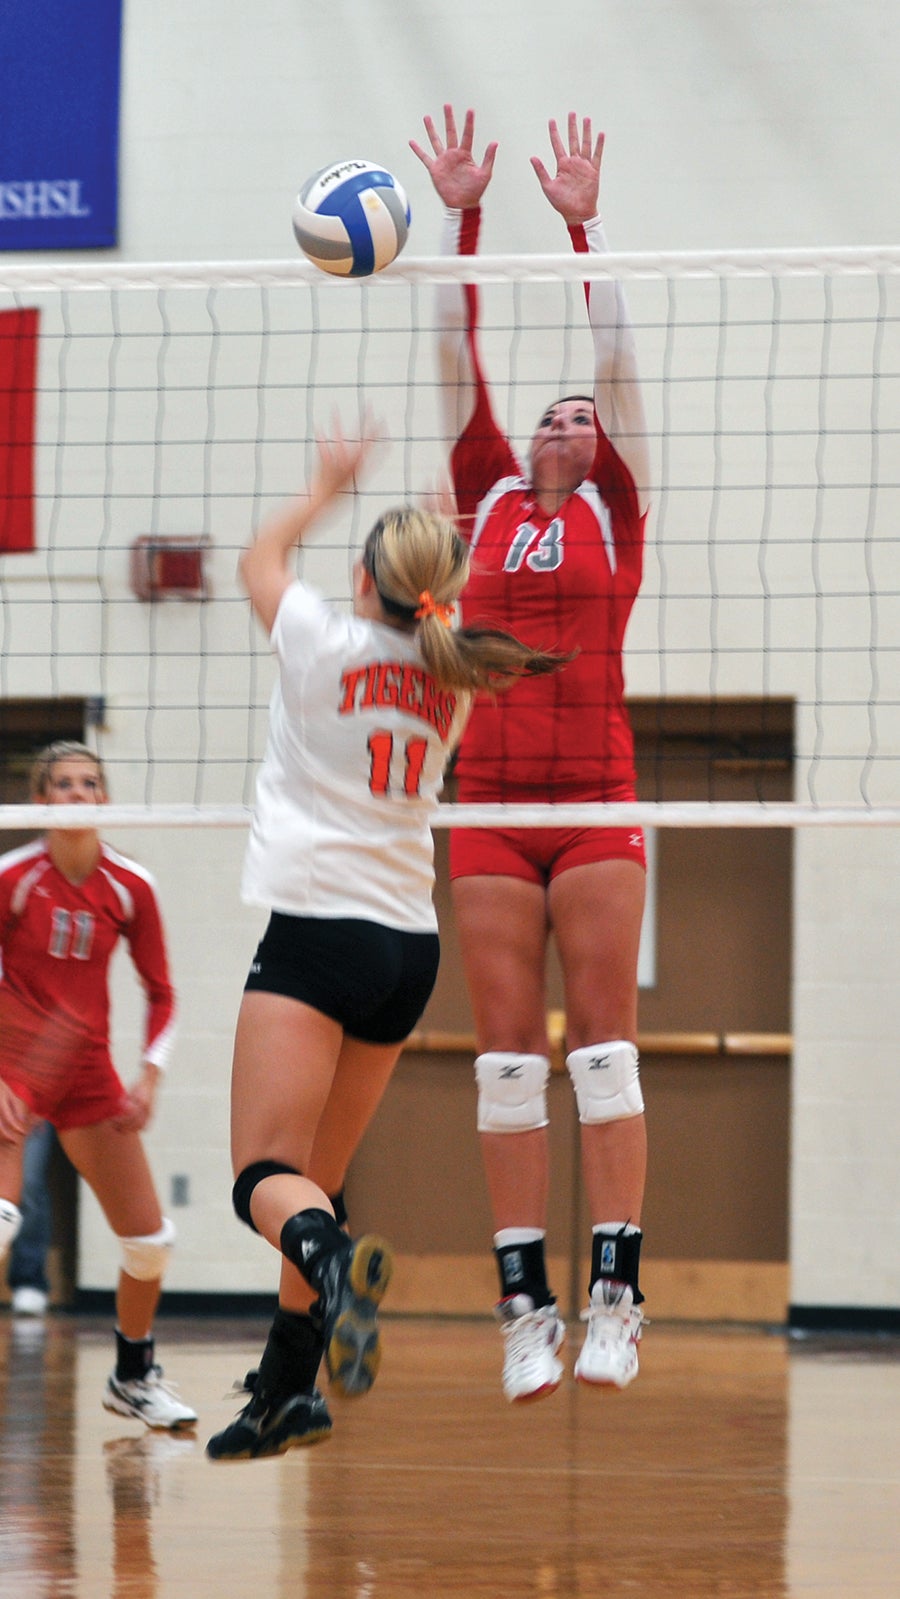 Packer Volleyball Team Drops Opener Austin Daily Herald Austin Daily Herald